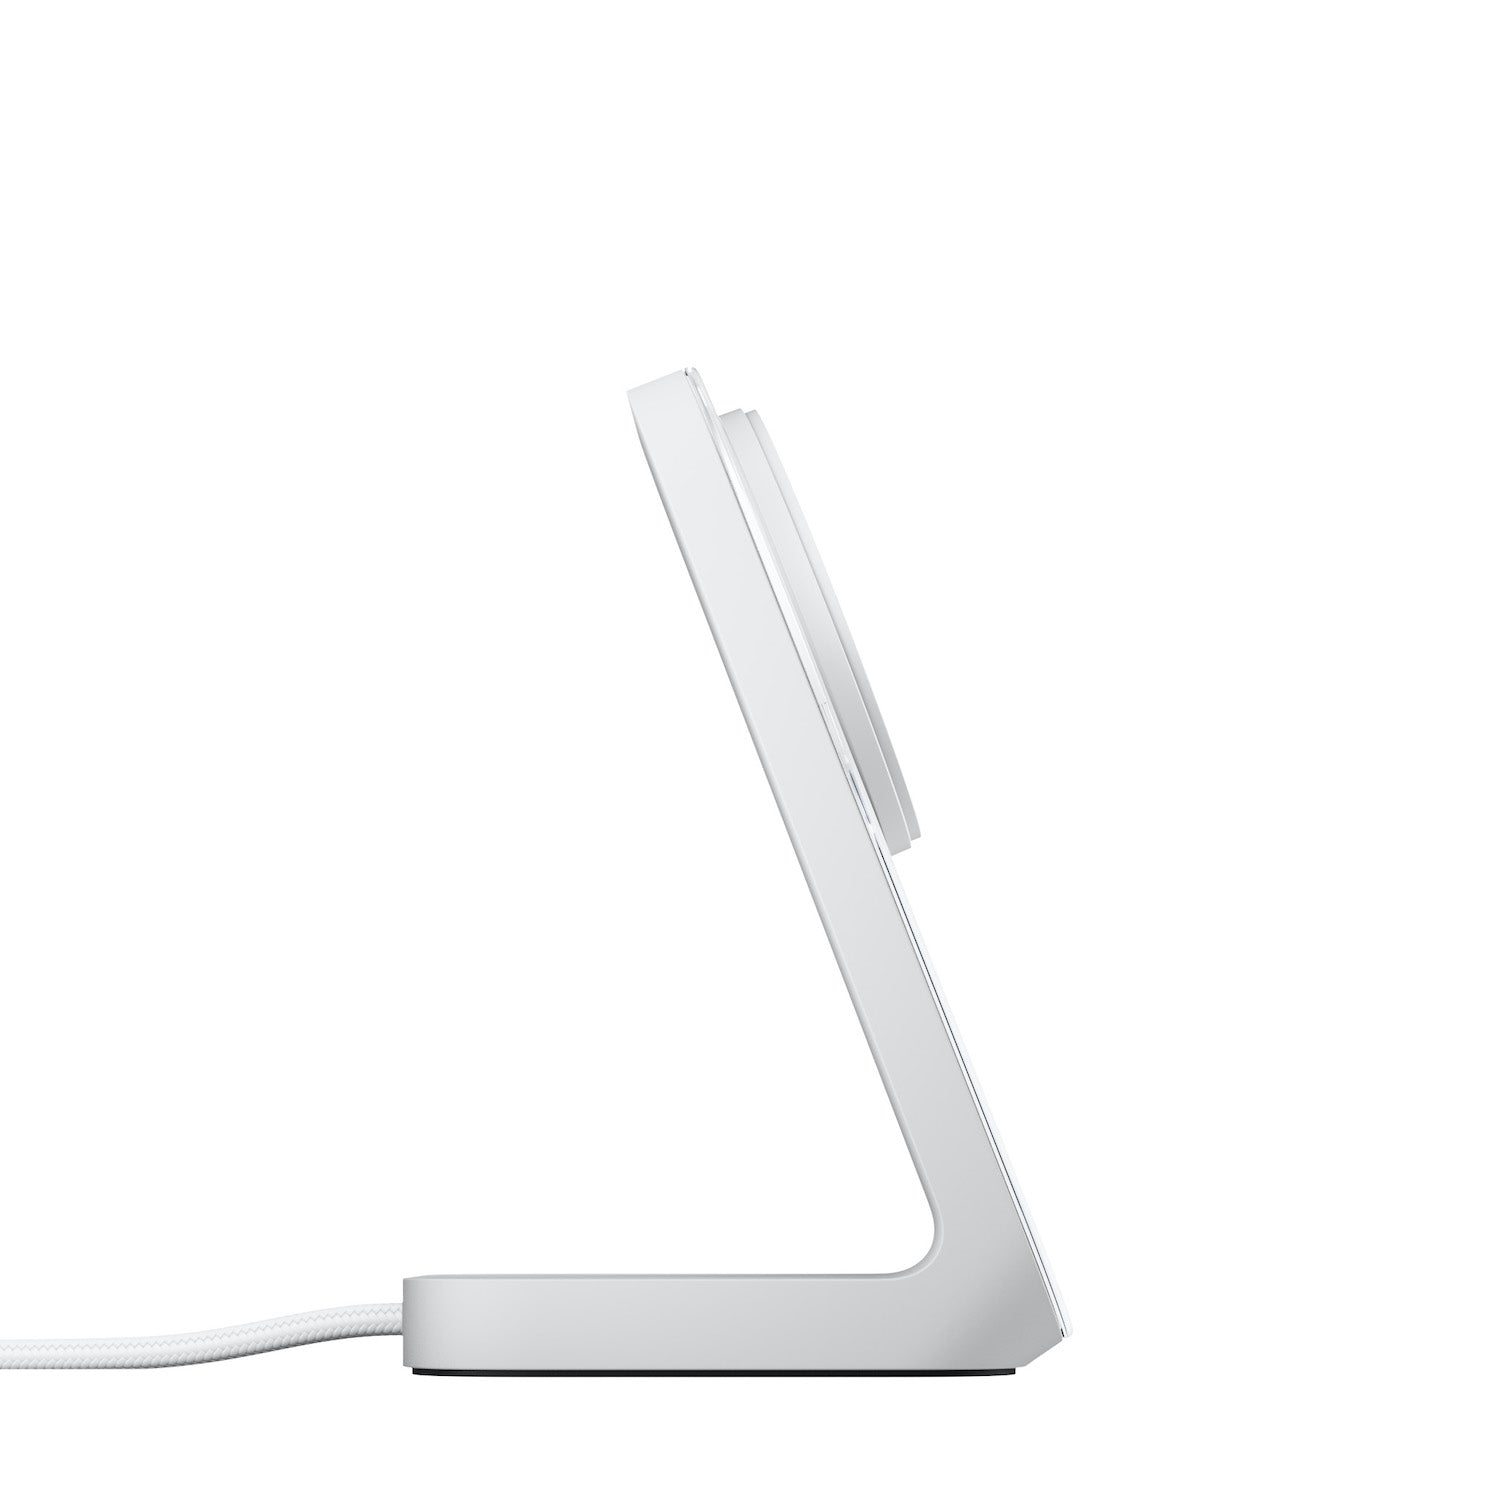 Nomad 15W MagSafe Compatible Wireless Charger Stand - White